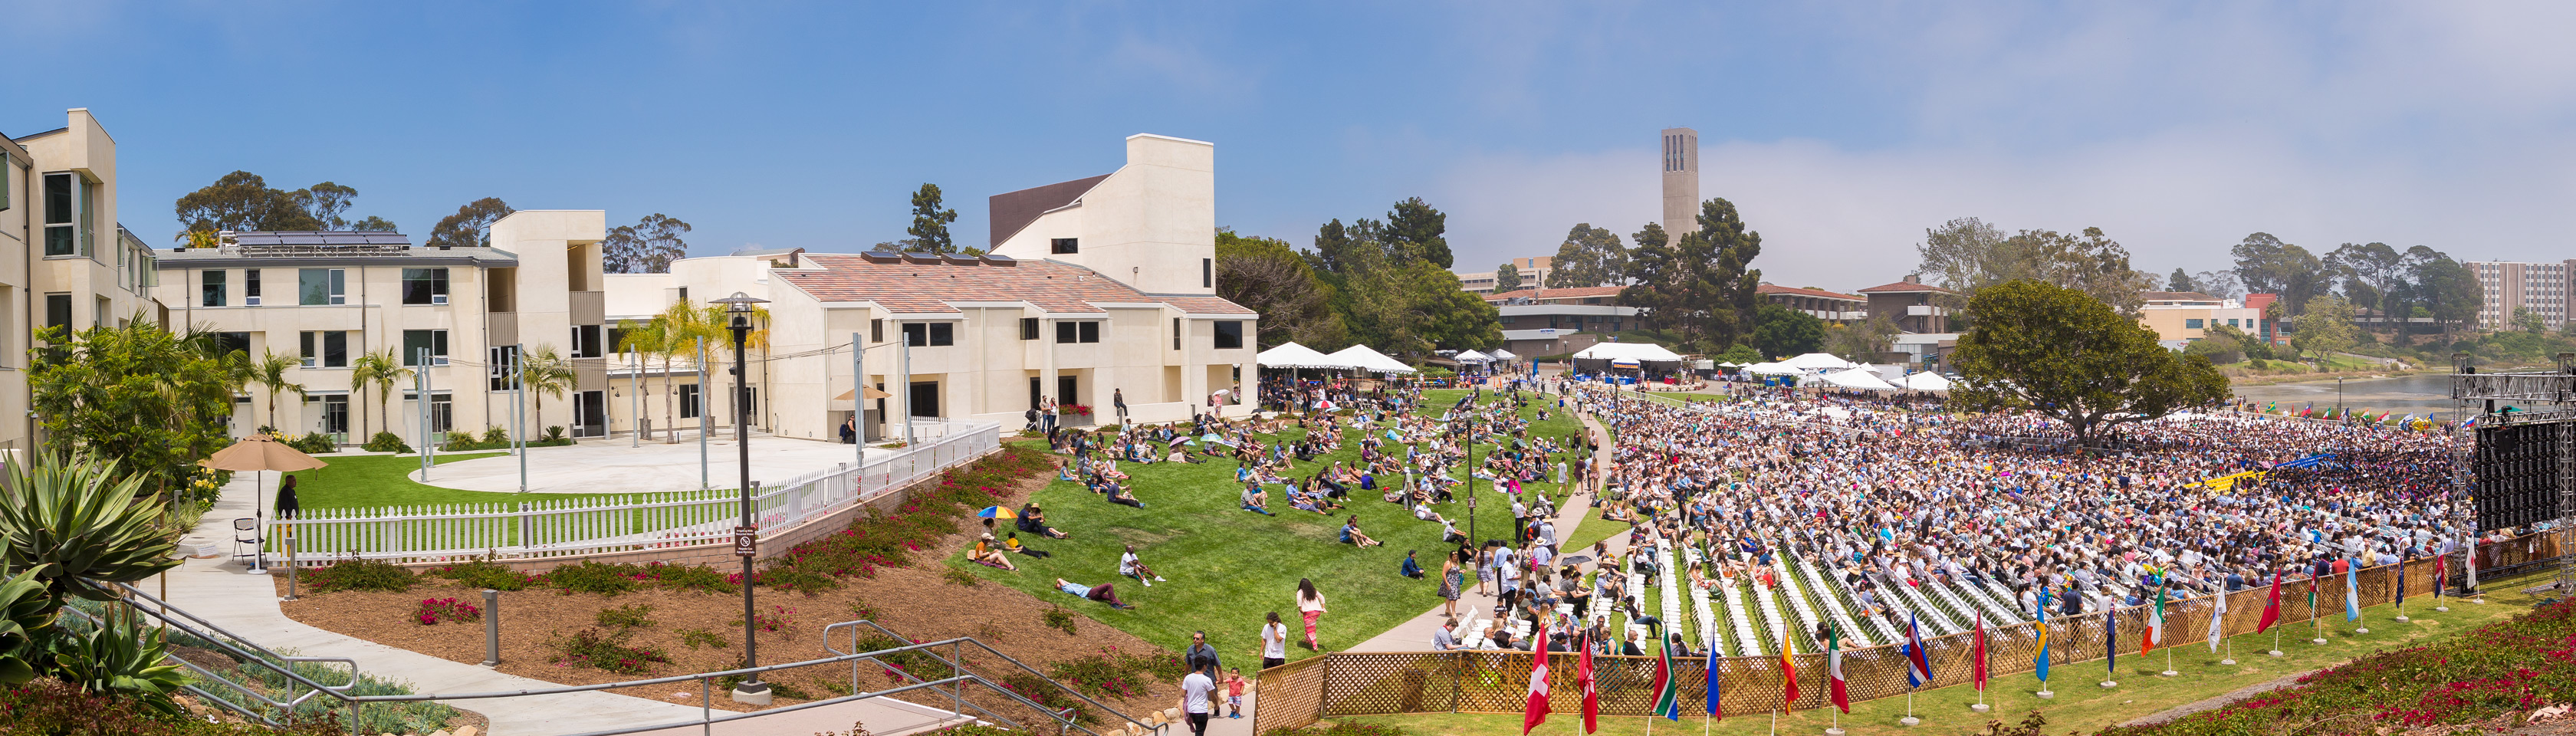 Commencement Directions and Parking UC Santa Barbara